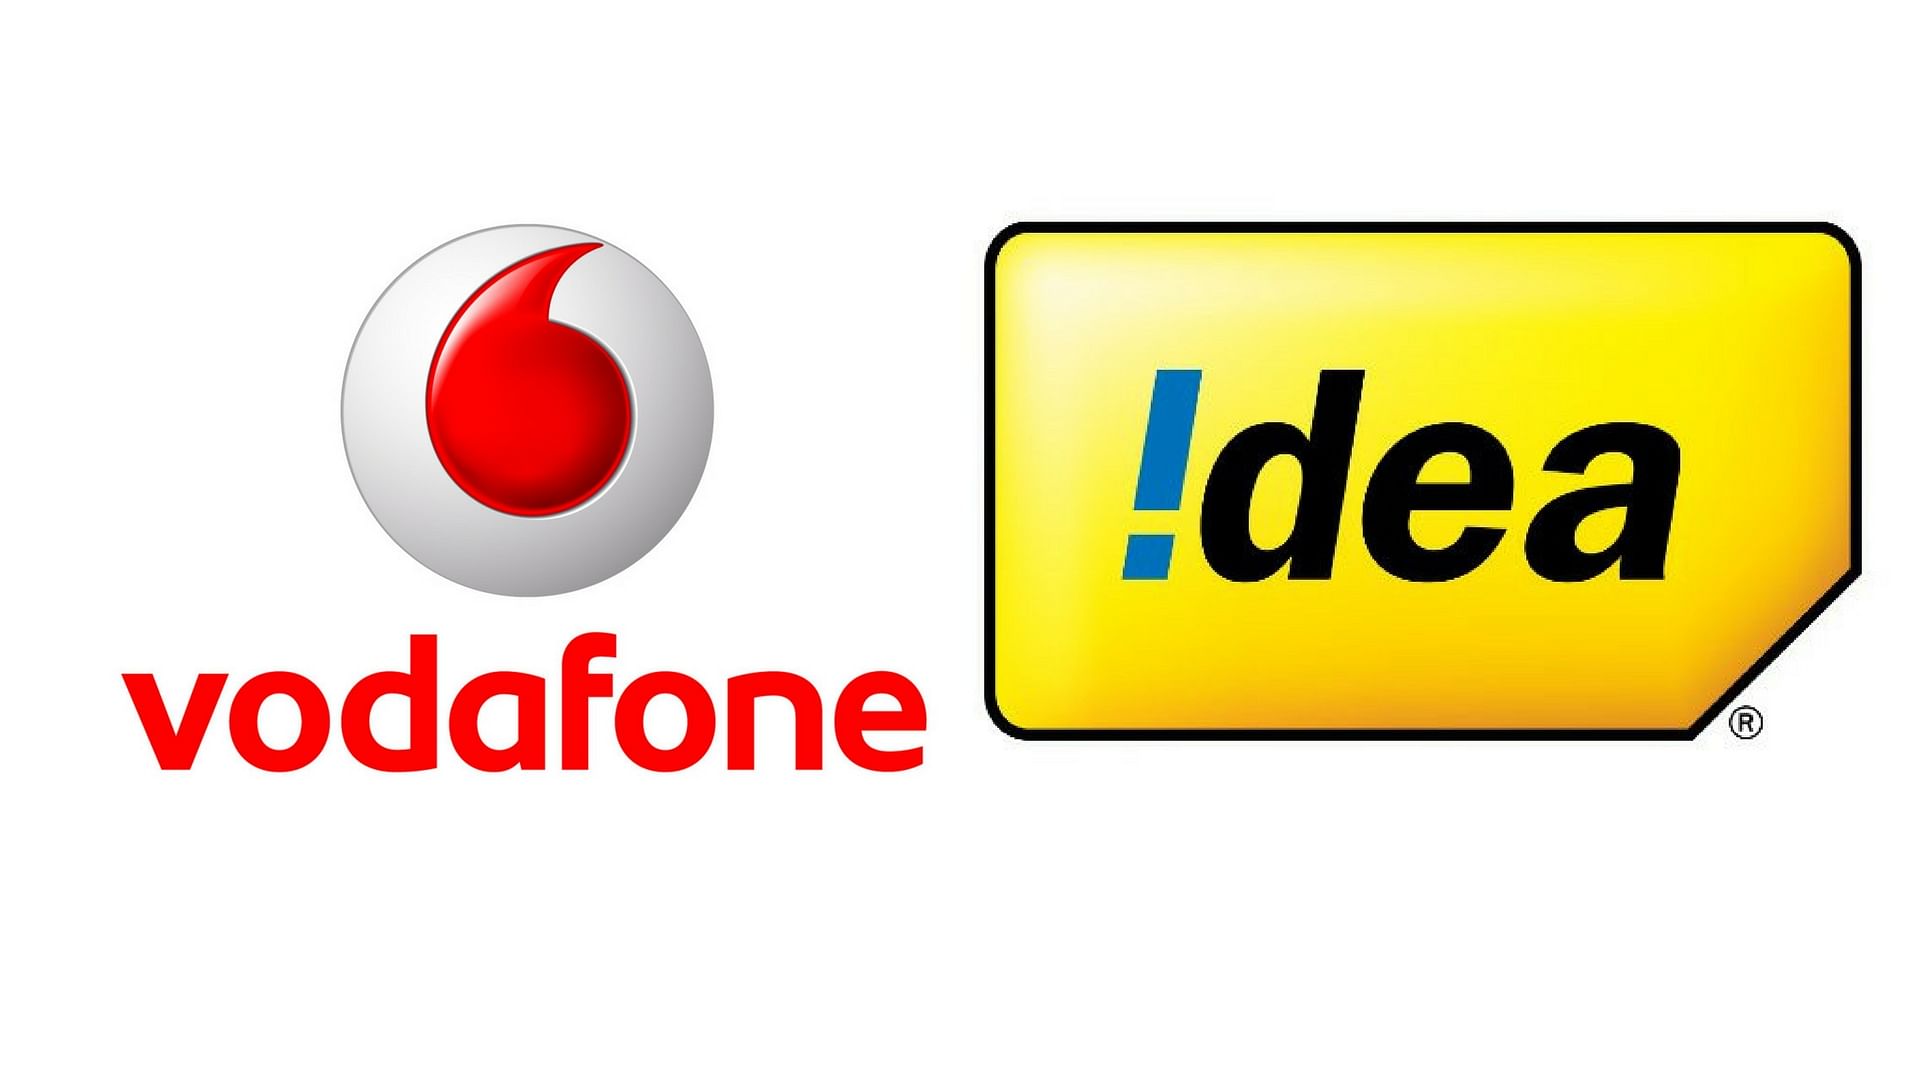 Vodafone will hold 45.1 percent of the merged entity, while Idea will hold 26 percent.  (Photo Courtesy: <a href="https://www.vodafone.co.uk/cs/groups/public/documents/webcontent/1287x929_vodafone_logo.jpg">Vodafone.co.uk</a>/Twitter/<a href="https://twitter.com/ideacellular">@ideacellular</a>/Altered by <b>The Quint</b>)